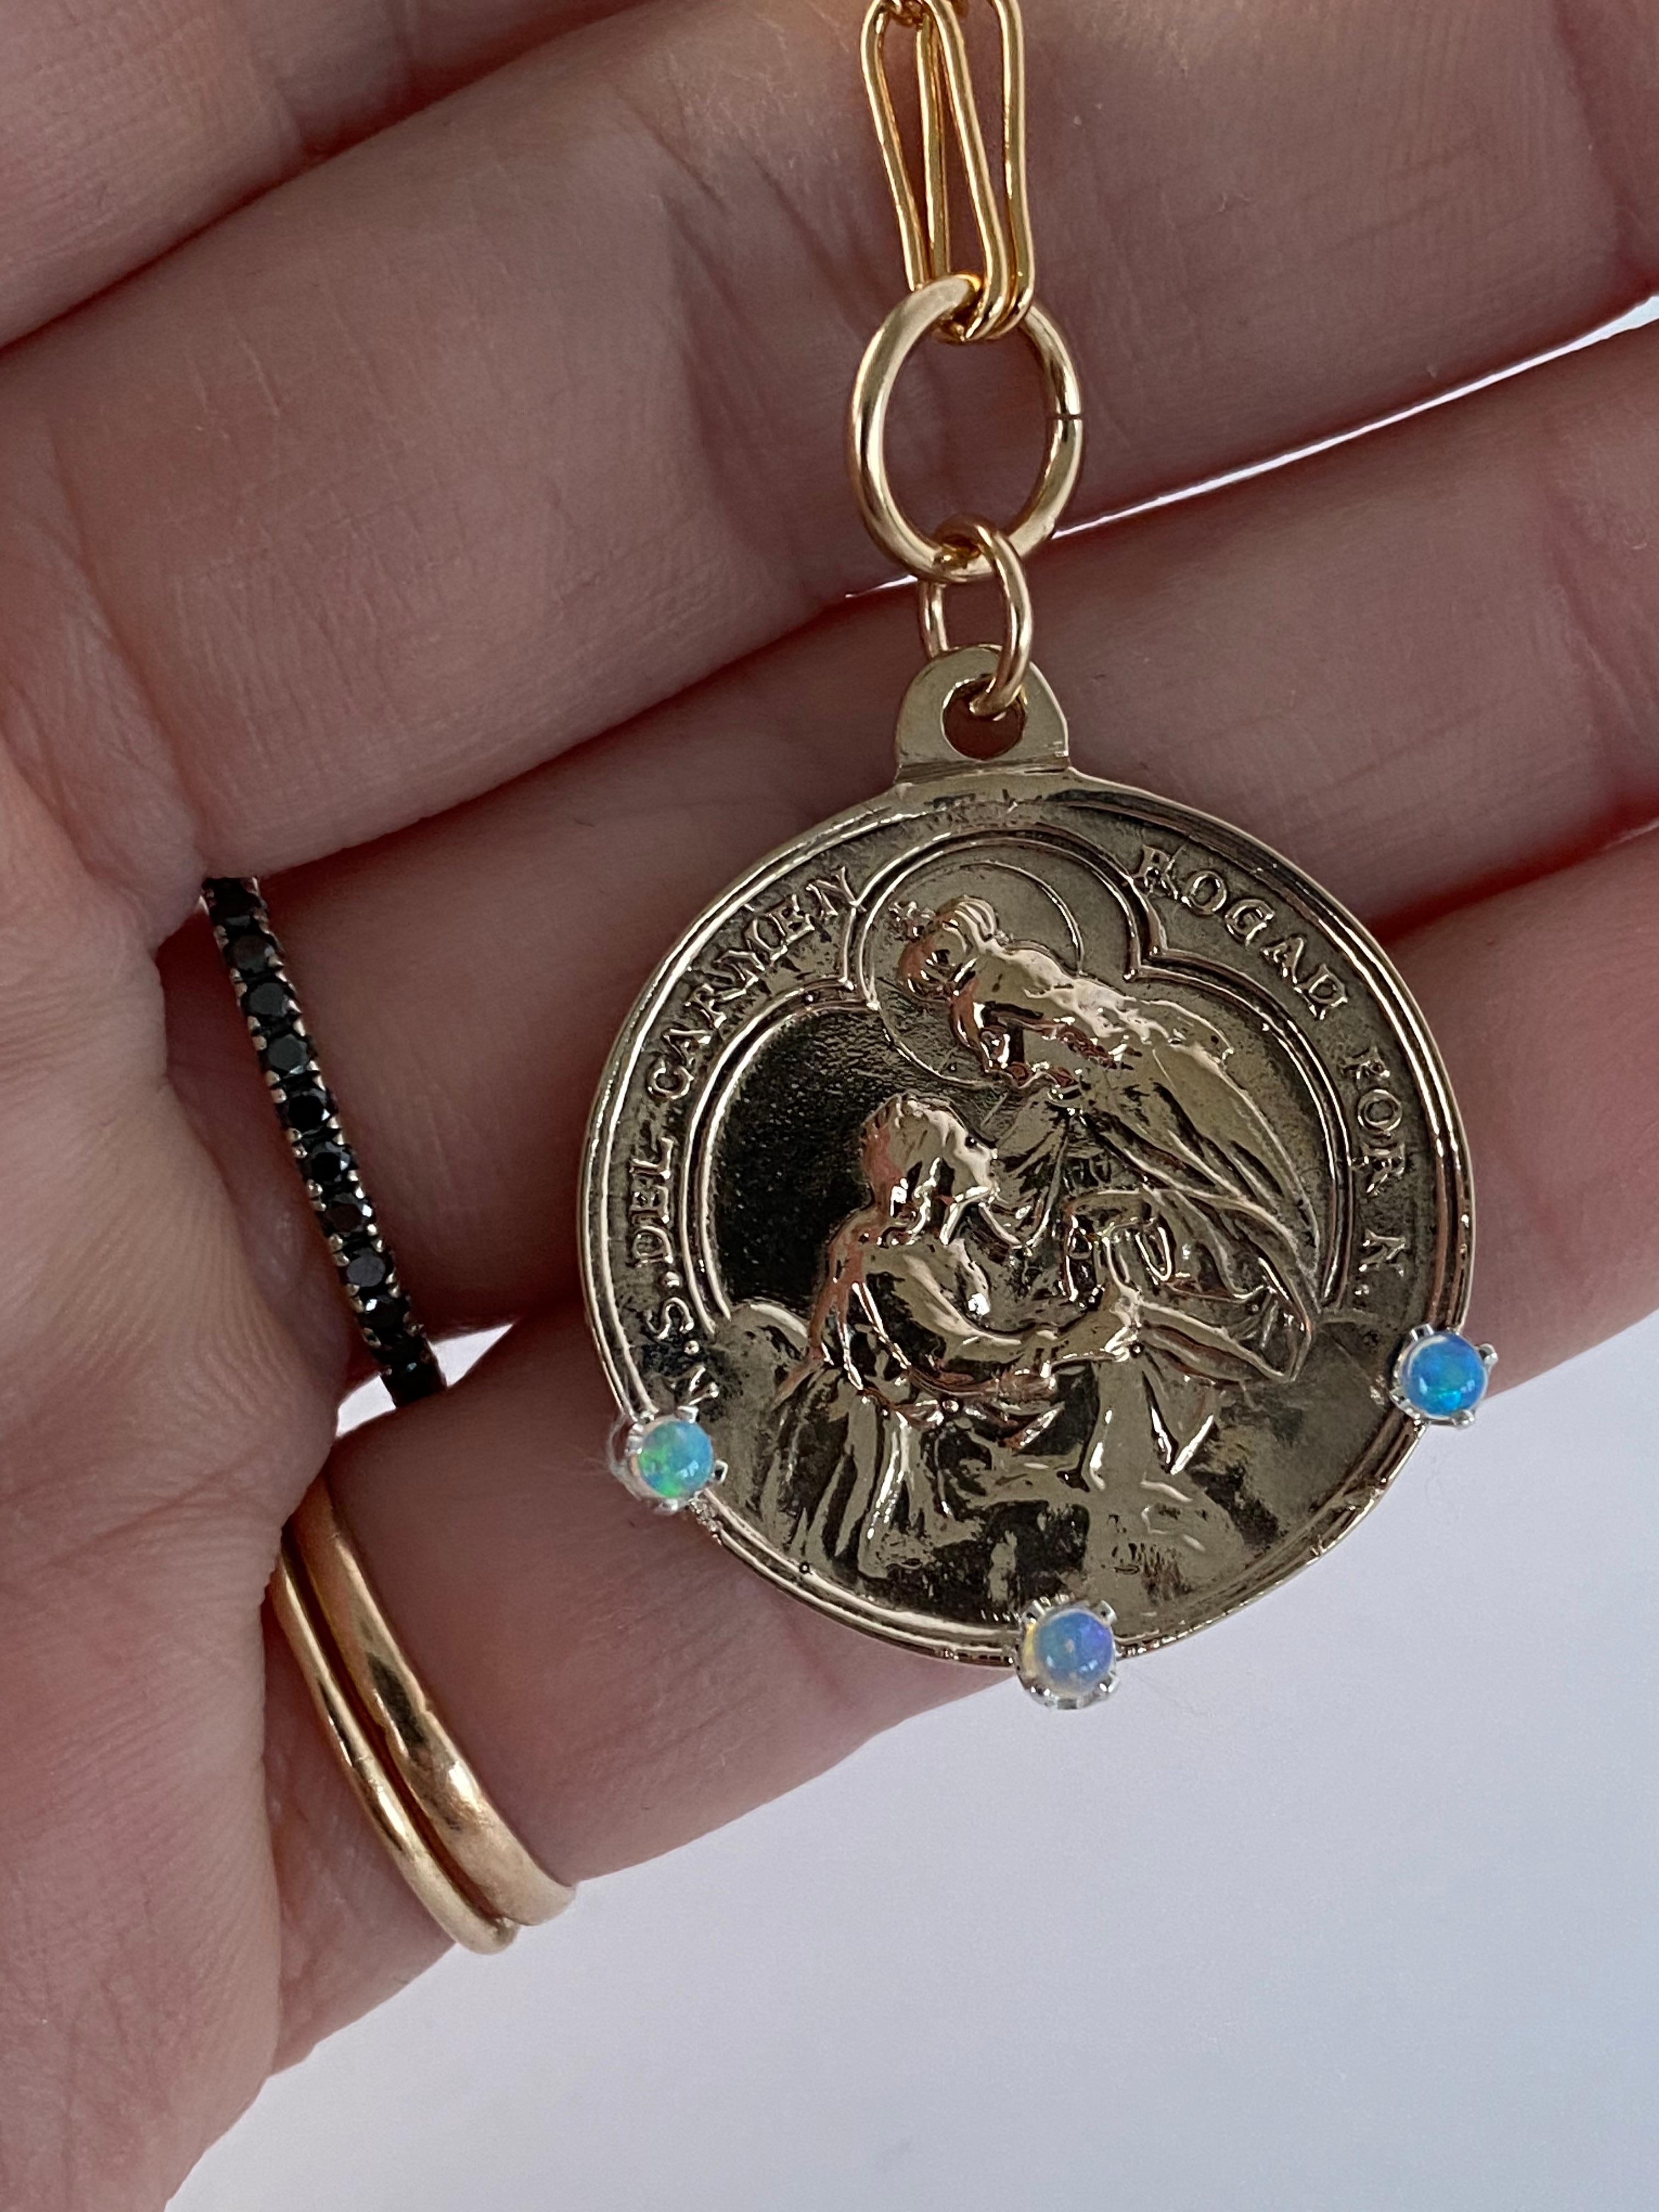 Bronze Medal Necklace on a Gold Filled Chunky Chain Virgin Mary with 3 Opals set around the pendant Coin Pendant J Dauphin

Exclusive piece with Virgin Mary pendant with 3 Opals. The Chain is 24' long but can be made shorter or longer on